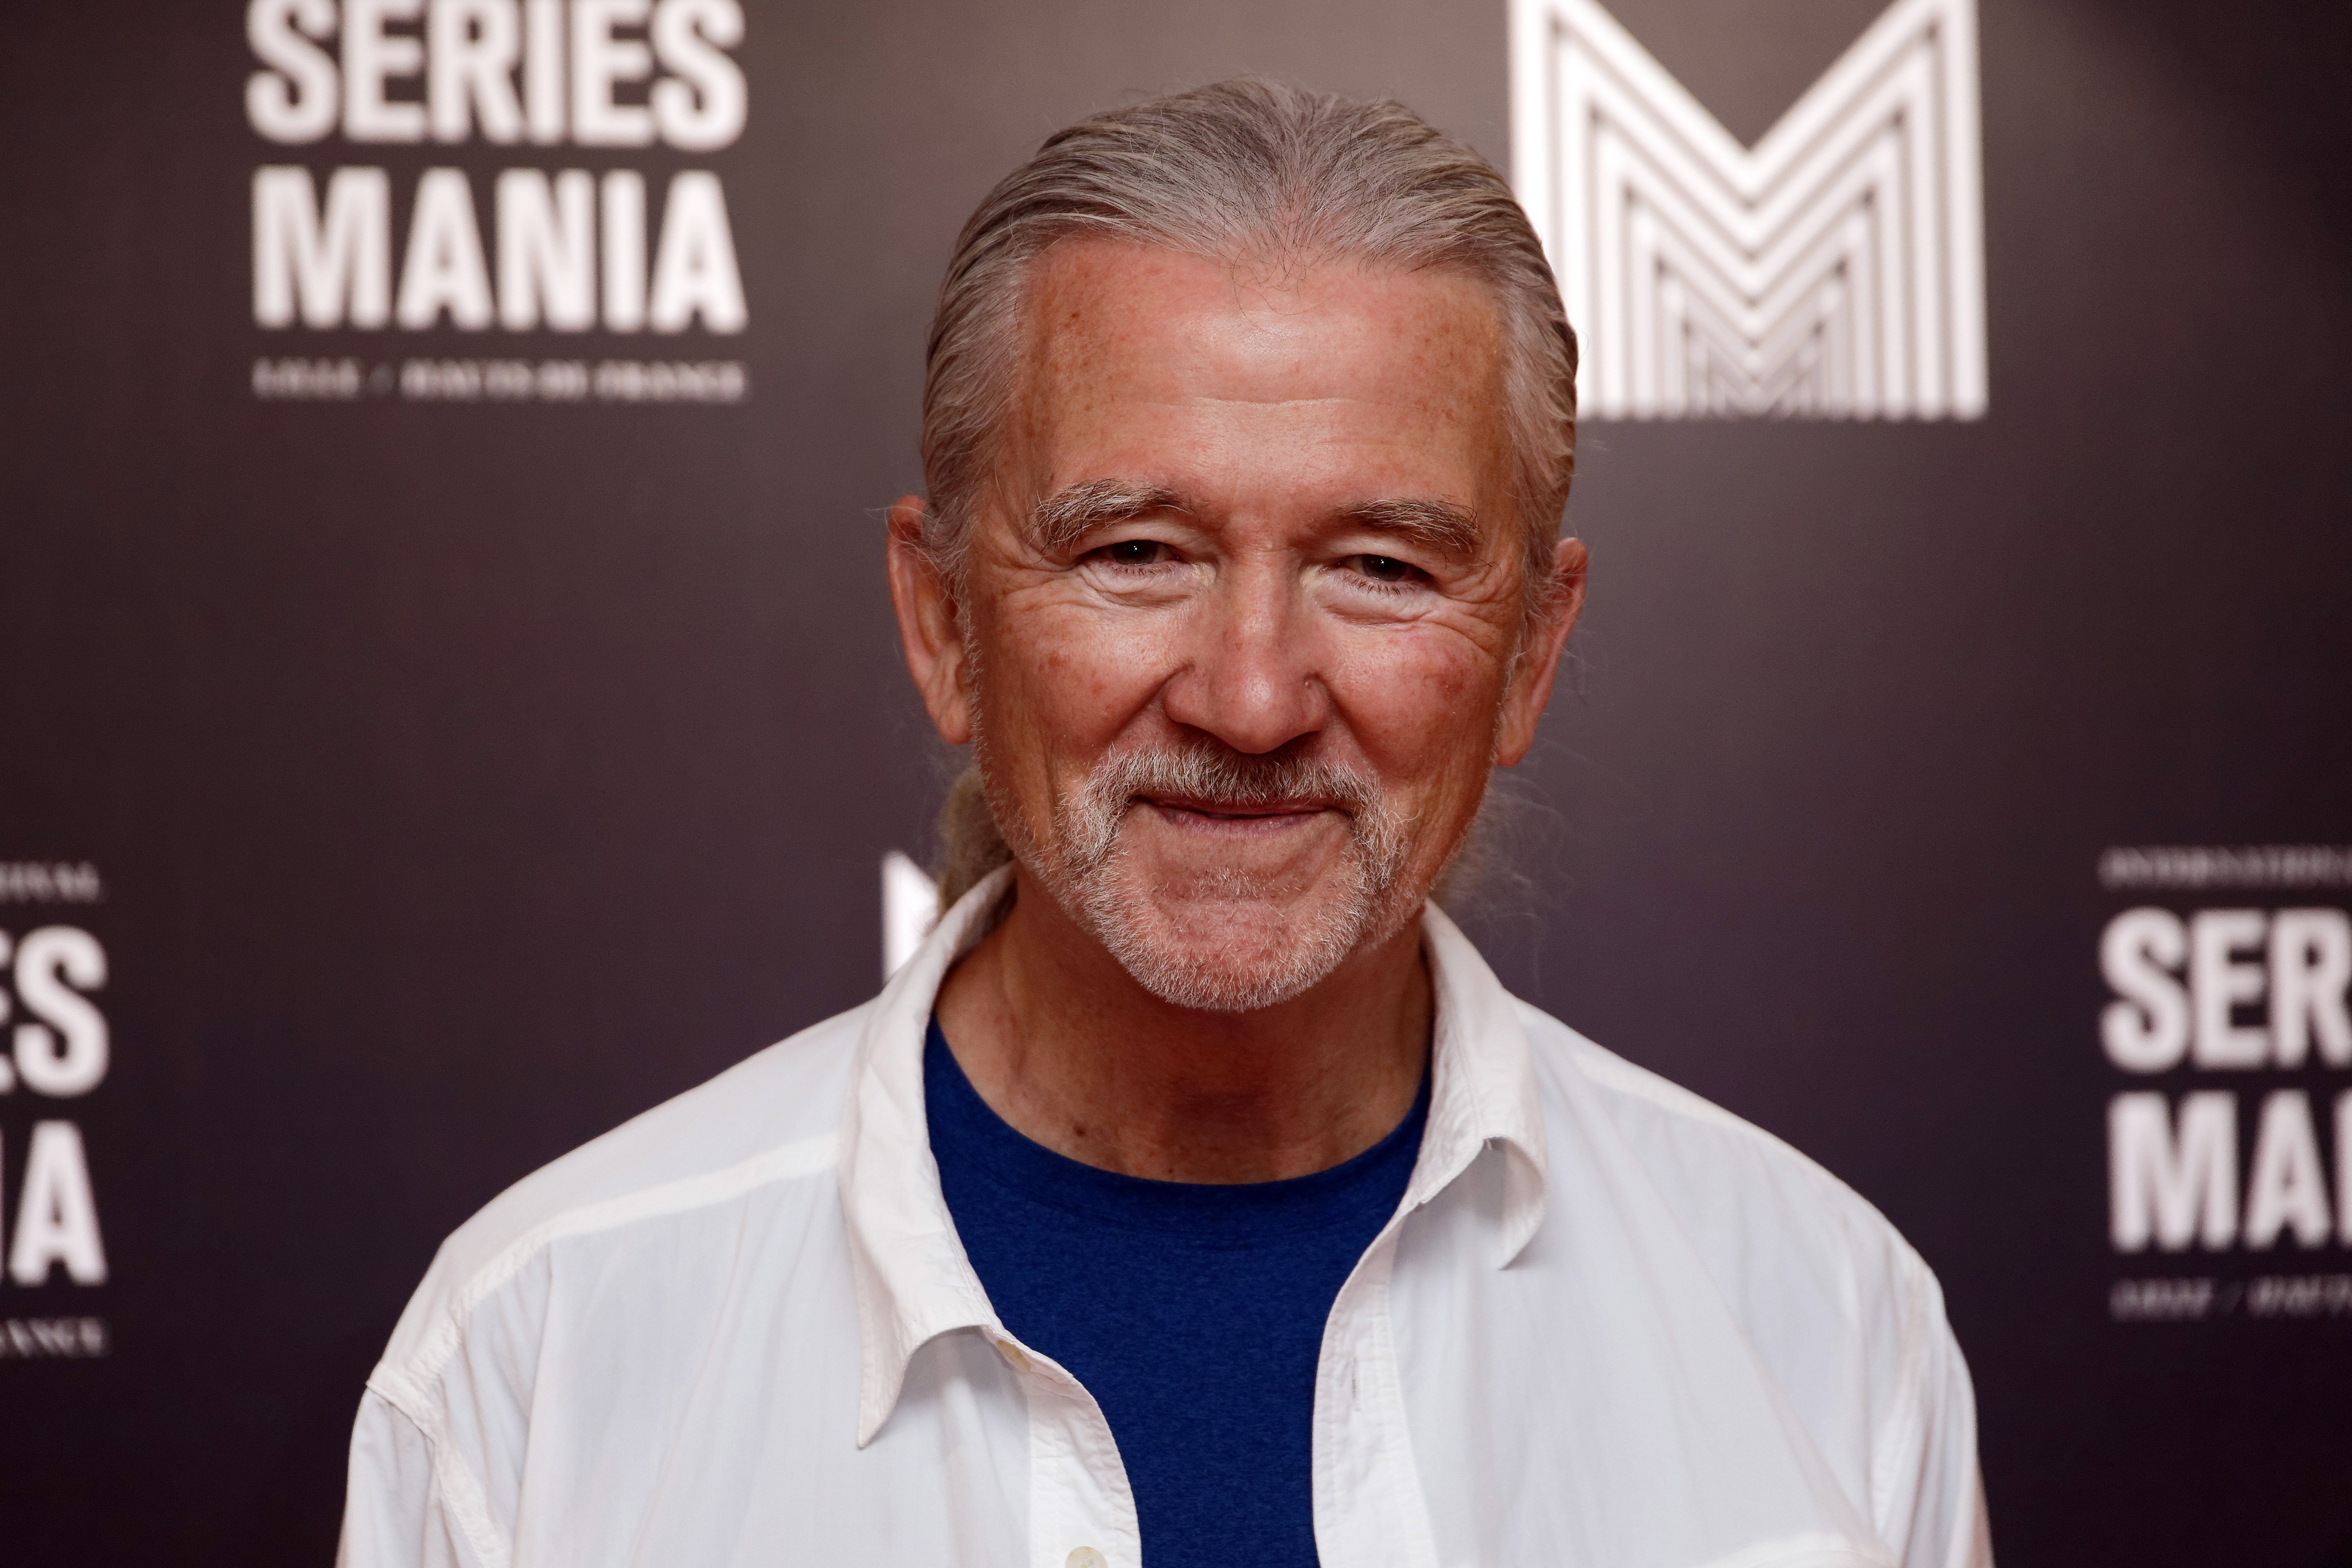 Patrick Duffy on May 2, 2018 in Lille, France | Source: Getty Images